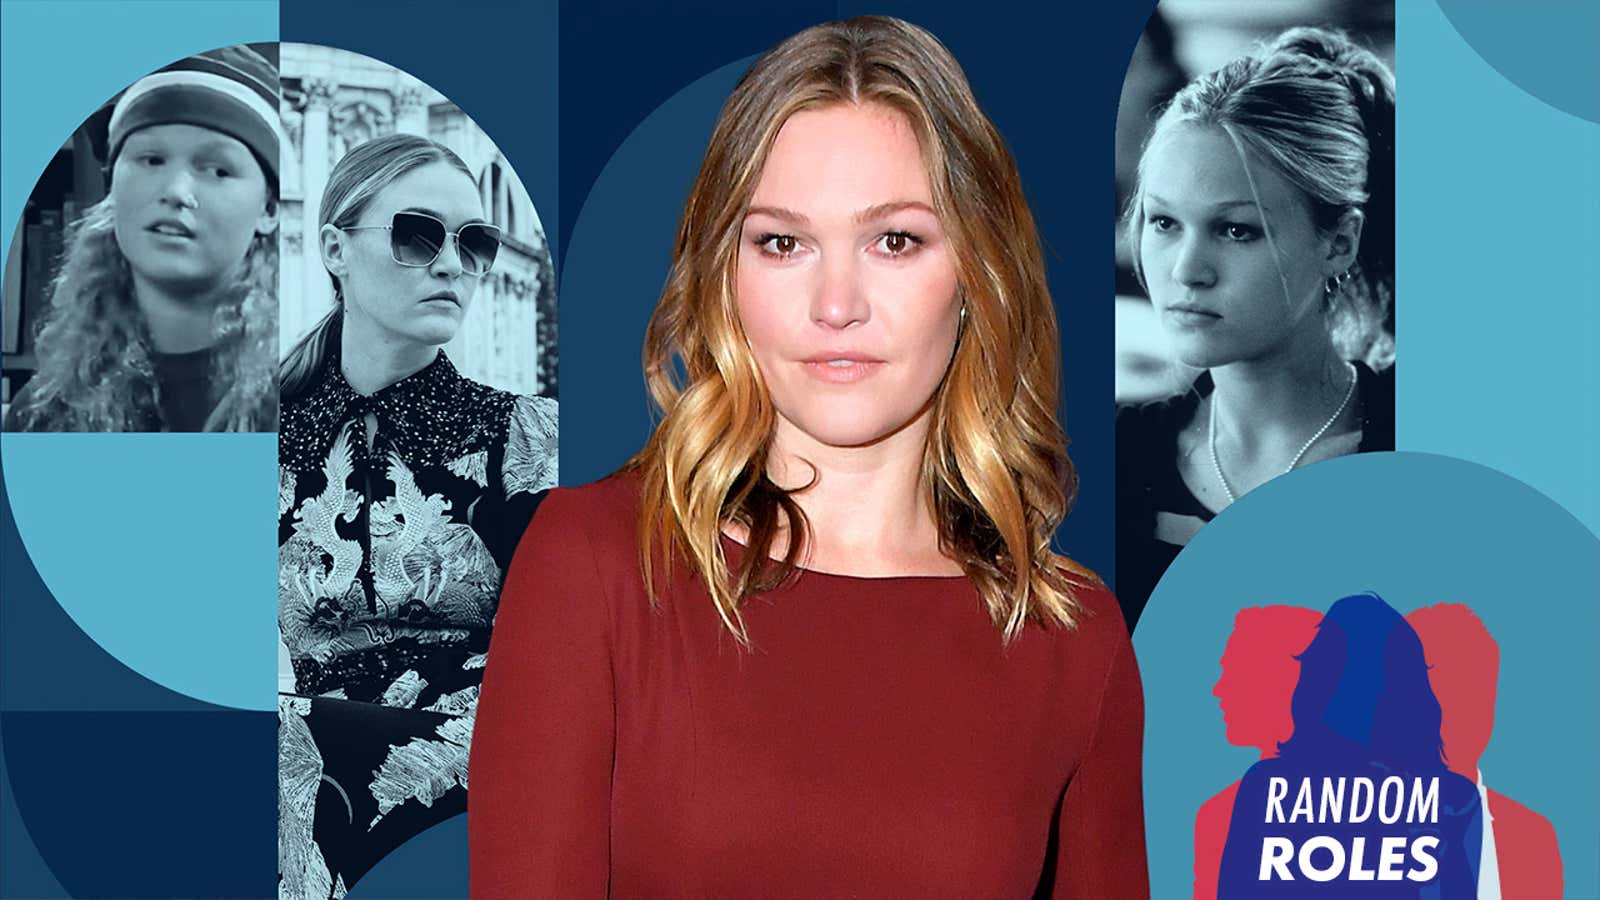 From left: Julia Stiles on Ghostwriter (Screenshot), on Riviera (Photo: Sundance Now), attending CNN Heroes at the American Museum of Natural History in 2019 (Photo: Michael Loccisano/Getty Images for WarnerMedia), and in 10 Things I Hate About You (Photo: Buena Vista/Moviepix/Getty Images)